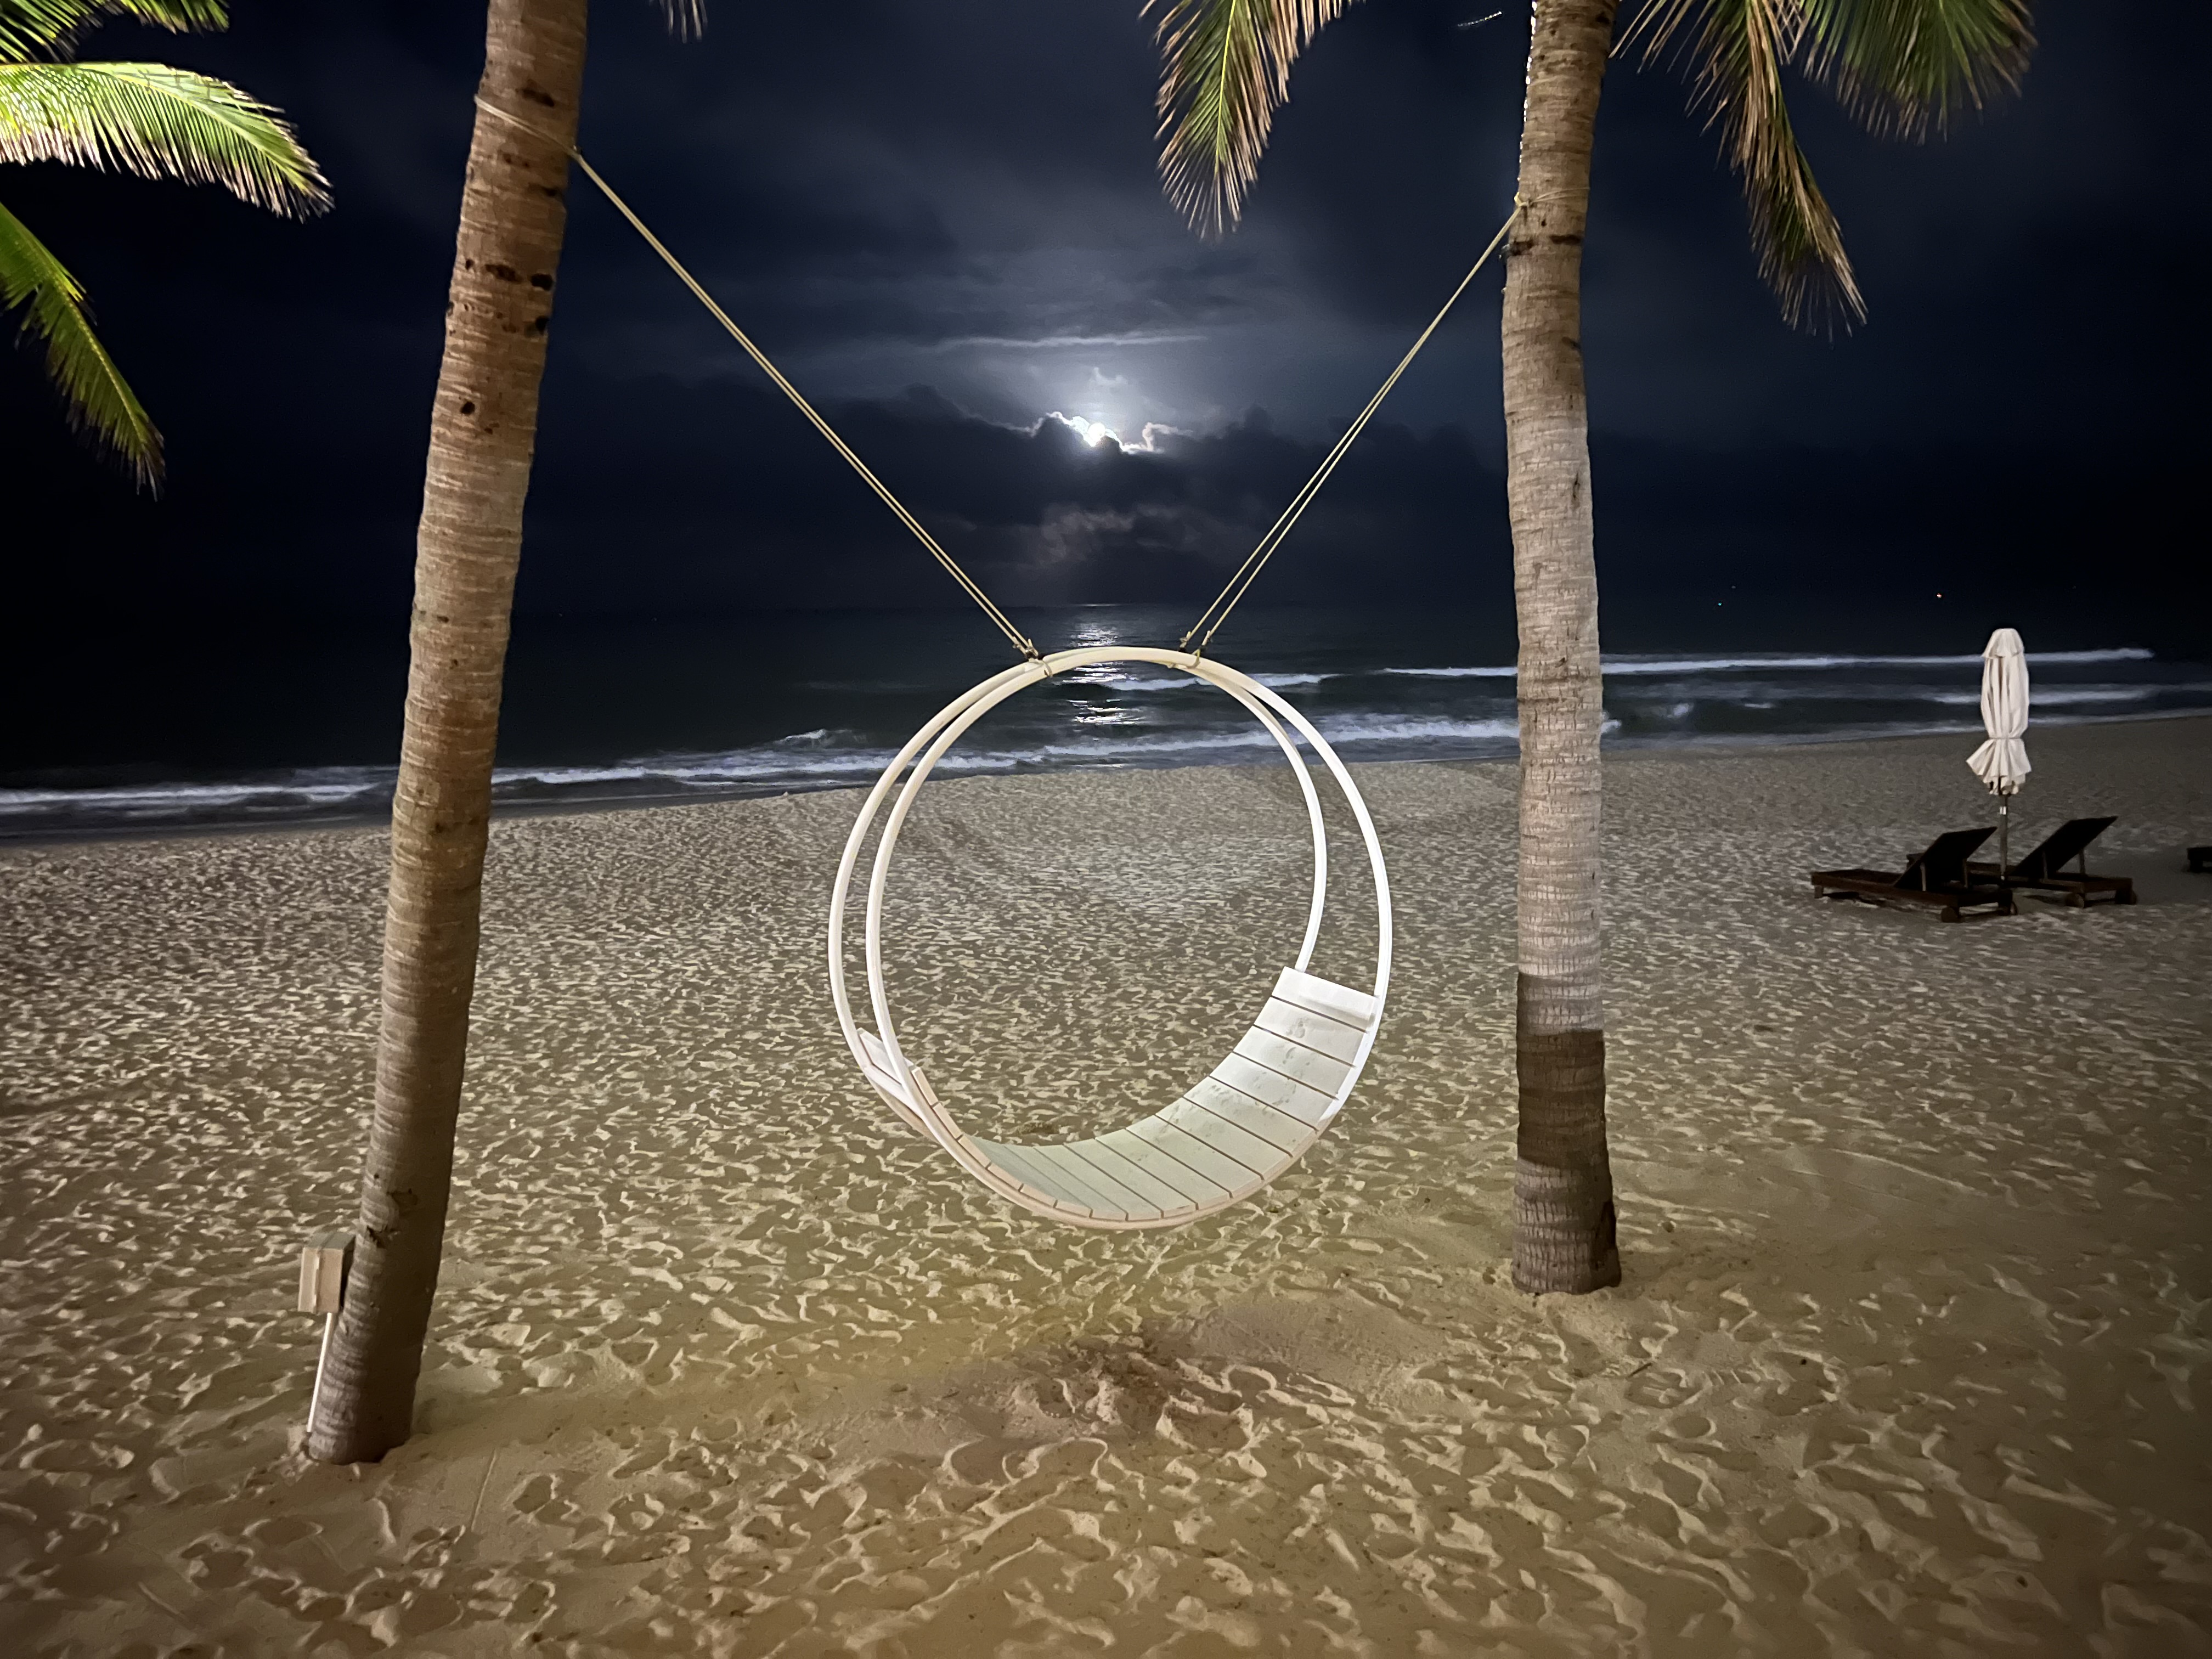 a swing from trees on a beach